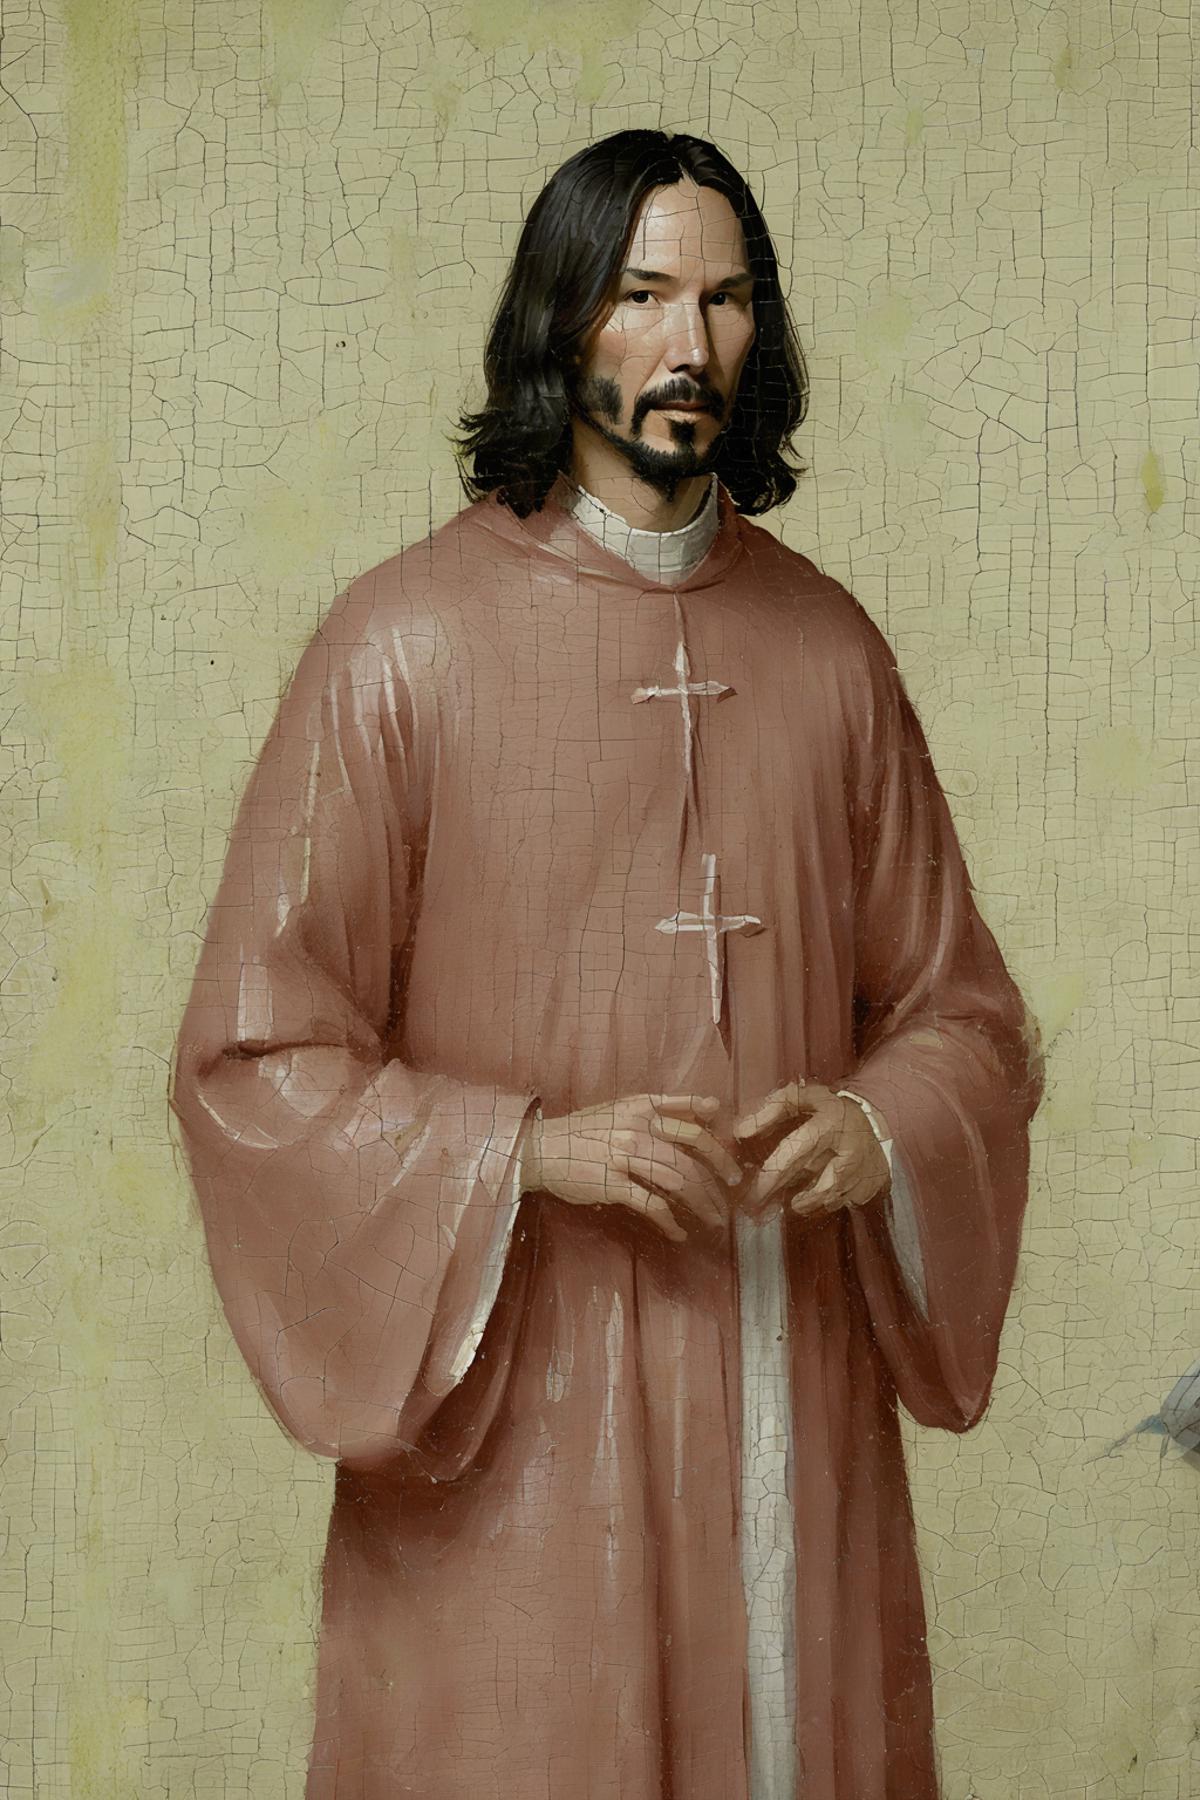 A portrait of a man in a long red robe with a cross on the front.